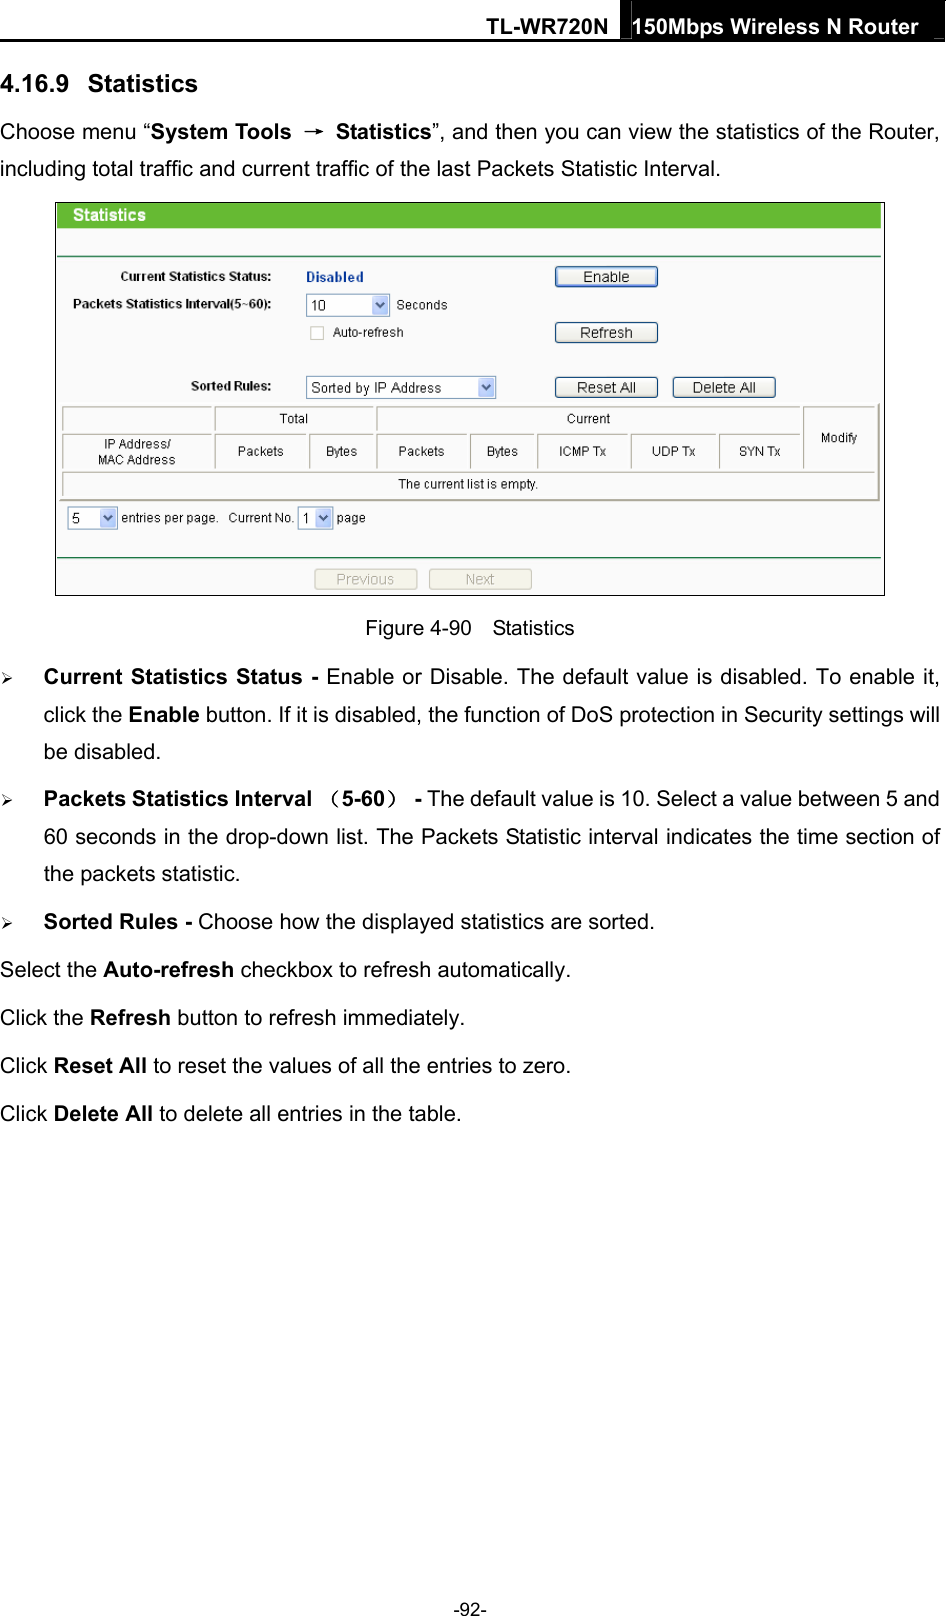 TL-WR720N 150Mbps Wireless N Router  4.16.9  Statistics Choose menu “System Tools  → Statistics”, and then you can view the statistics of the Router, including total traffic and current traffic of the last Packets Statistic Interval.  Figure 4-90  Statistics  Current Statistics Status - Enable or Disable. The default value is disabled. To enable it, click the Enable button. If it is disabled, the function of DoS protection in Security settings will be disabled.  Packets Statistics Interval （5-60） - The default value is 10. Select a value between 5 and 60 seconds in the drop-down list. The Packets Statistic interval indicates the time section of the packets statistic.    Sorted Rules - Choose how the displayed statistics are sorted. Select the Auto-refresh checkbox to refresh automatically. Click the Refresh button to refresh immediately. Click Reset All to reset the values of all the entries to zero.   Click Delete All to delete all entries in the table.   -92- 